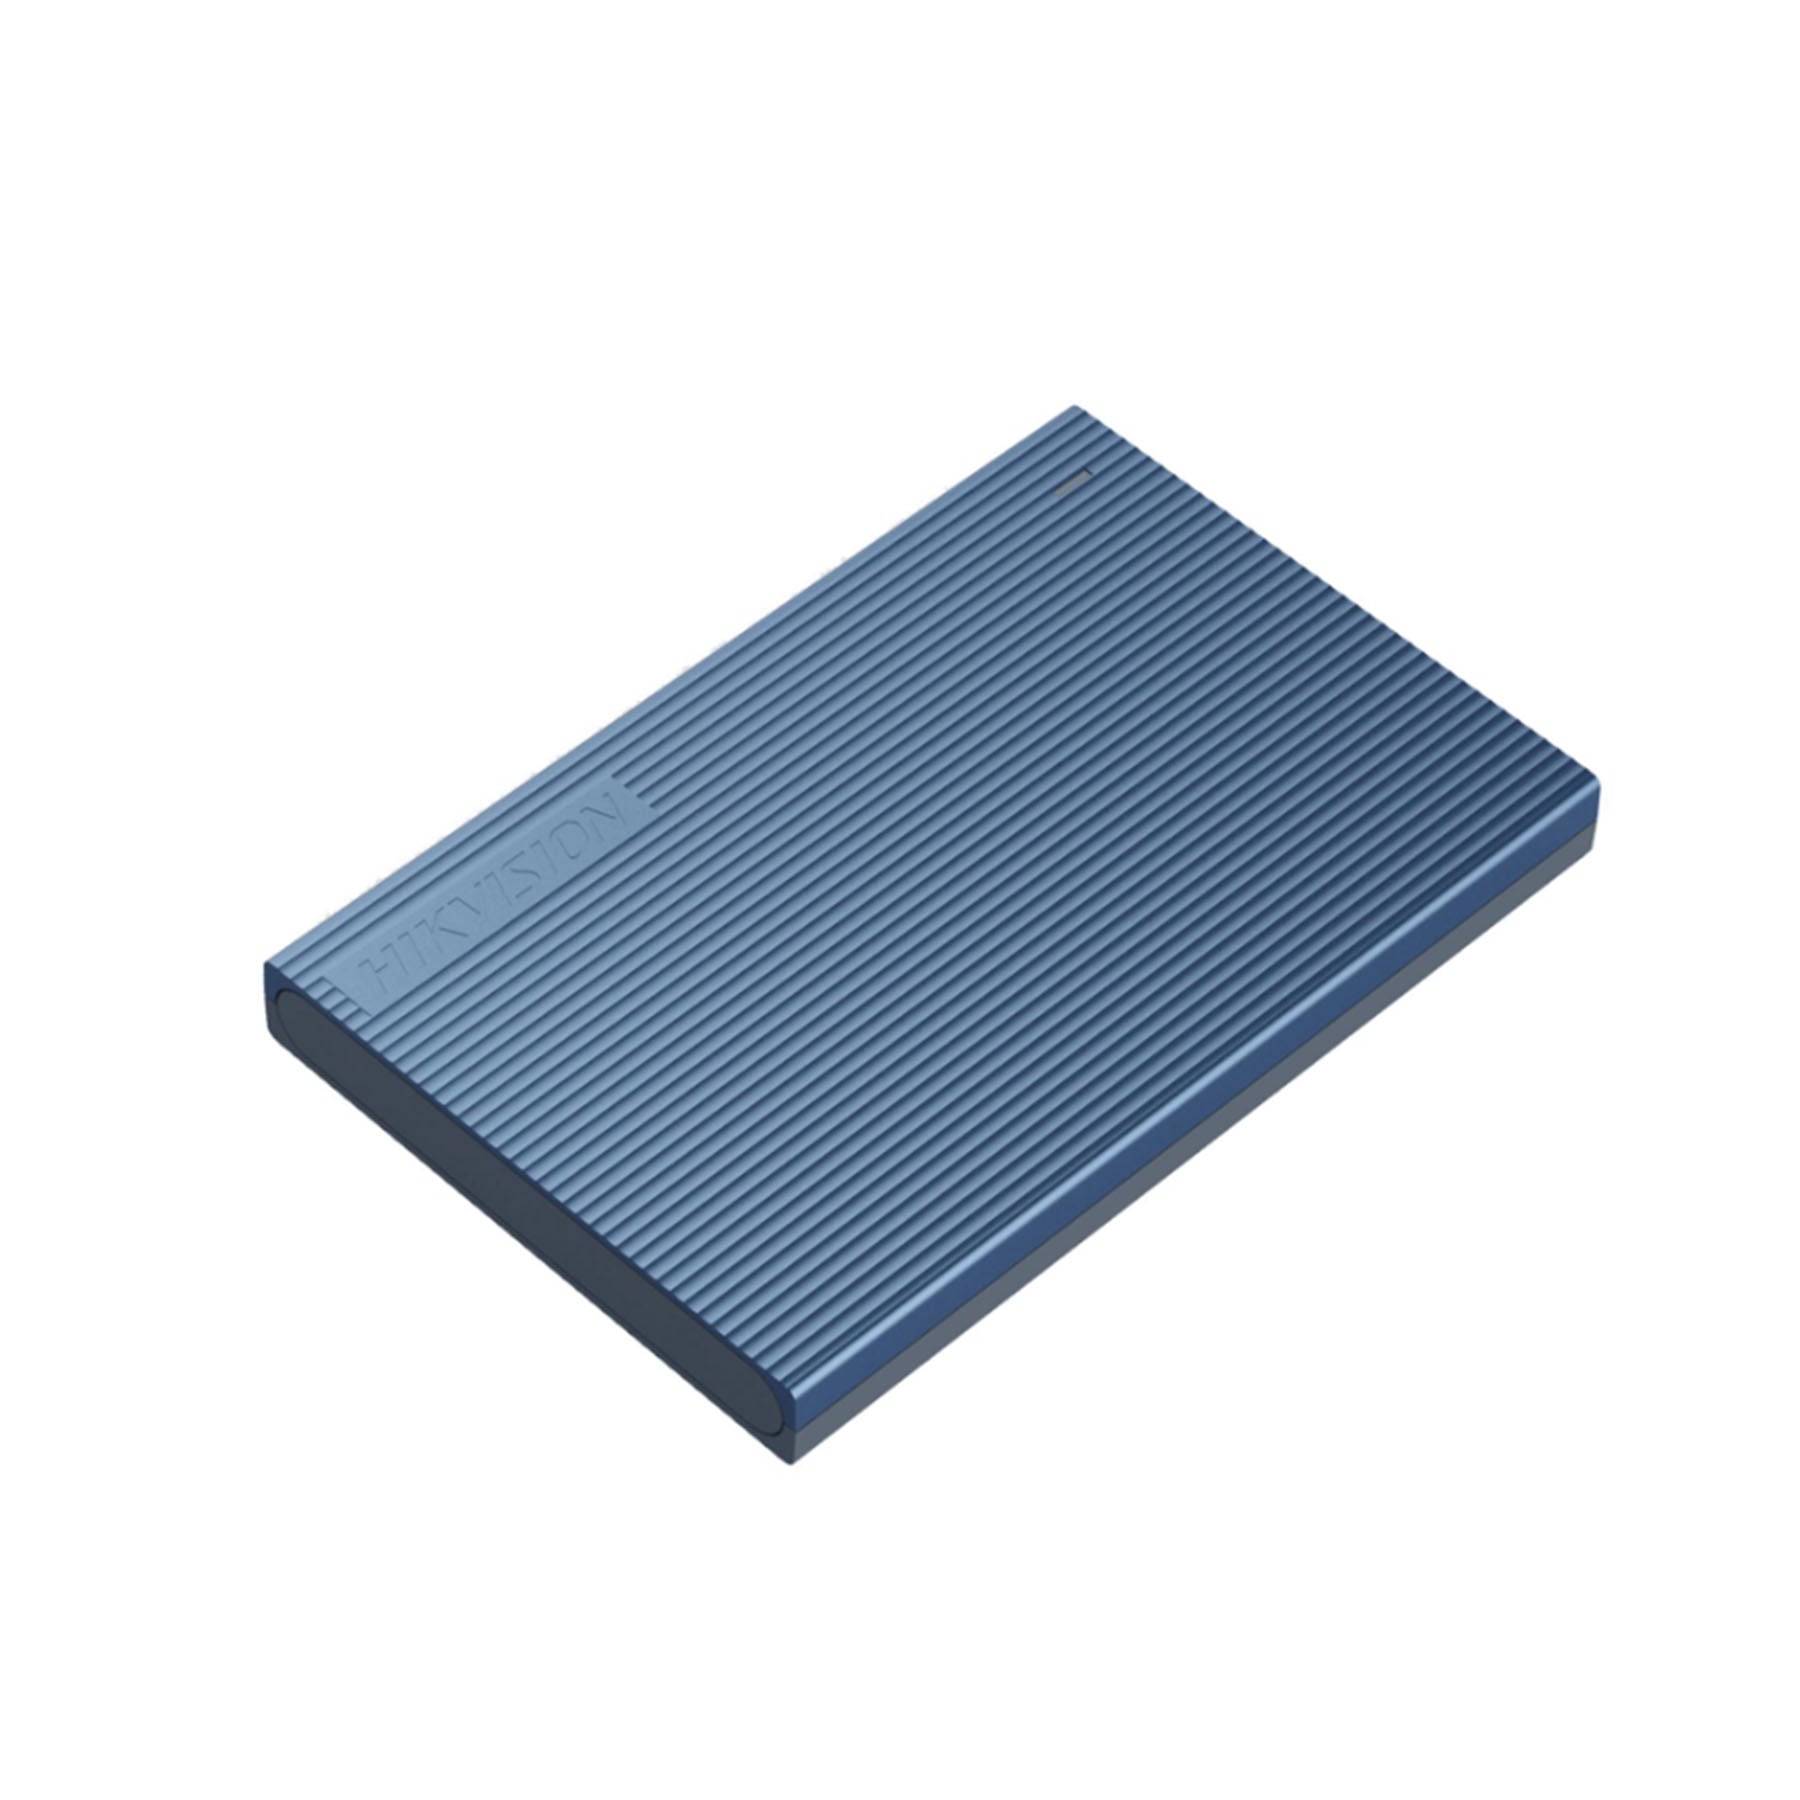 HikVision HS-EHDD-T30 External HDD